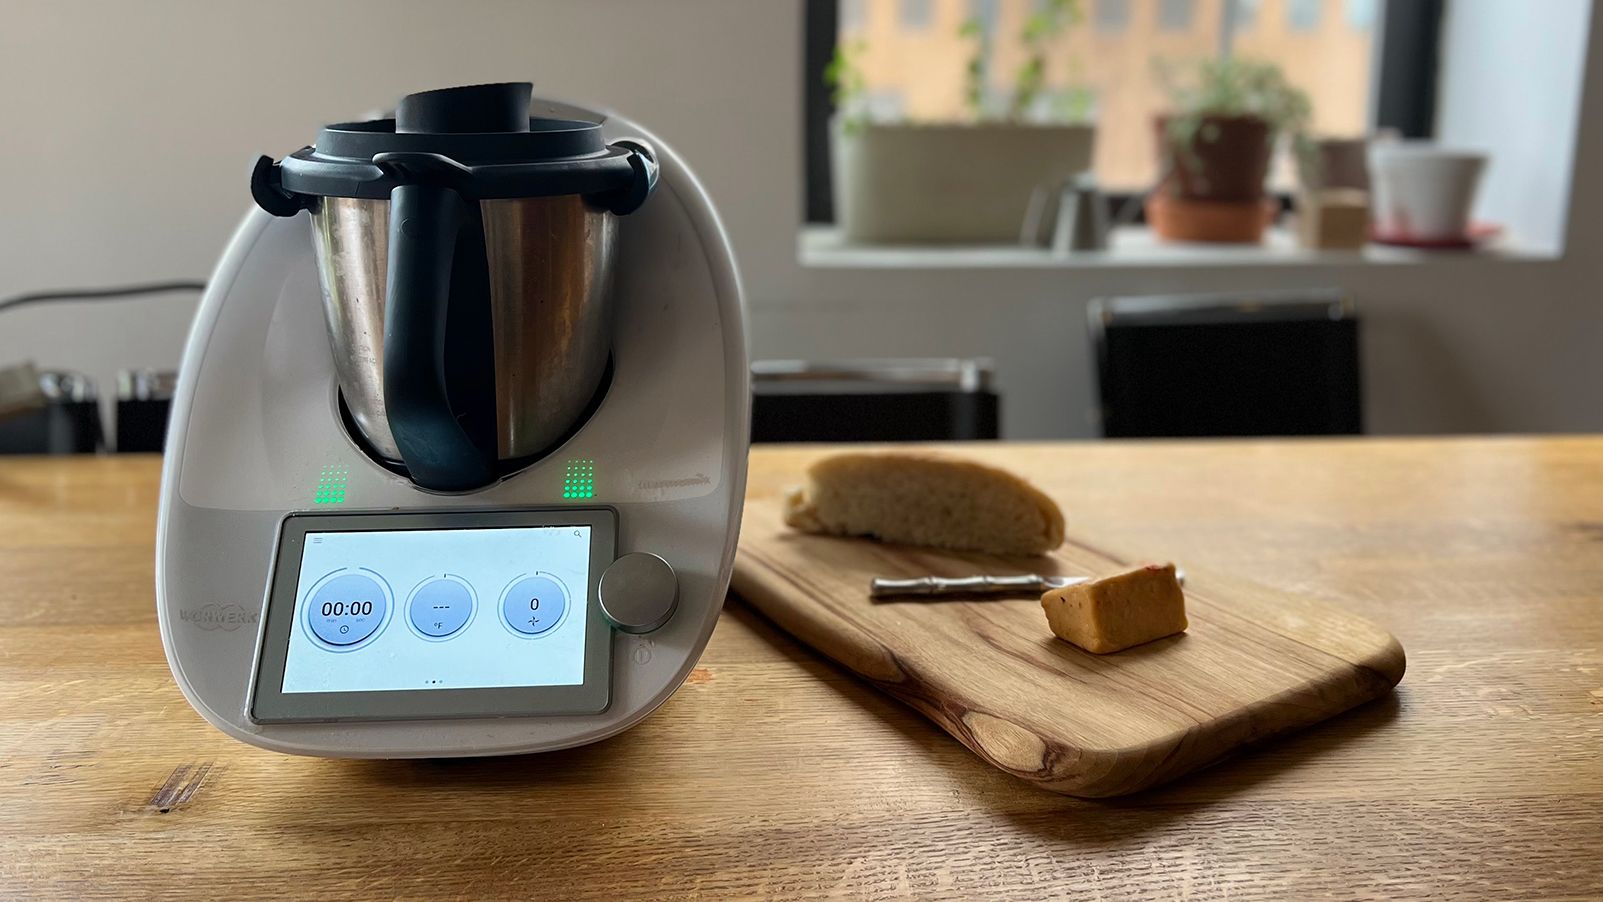 87 reasons not to buy a Thermomix - News + Articles 